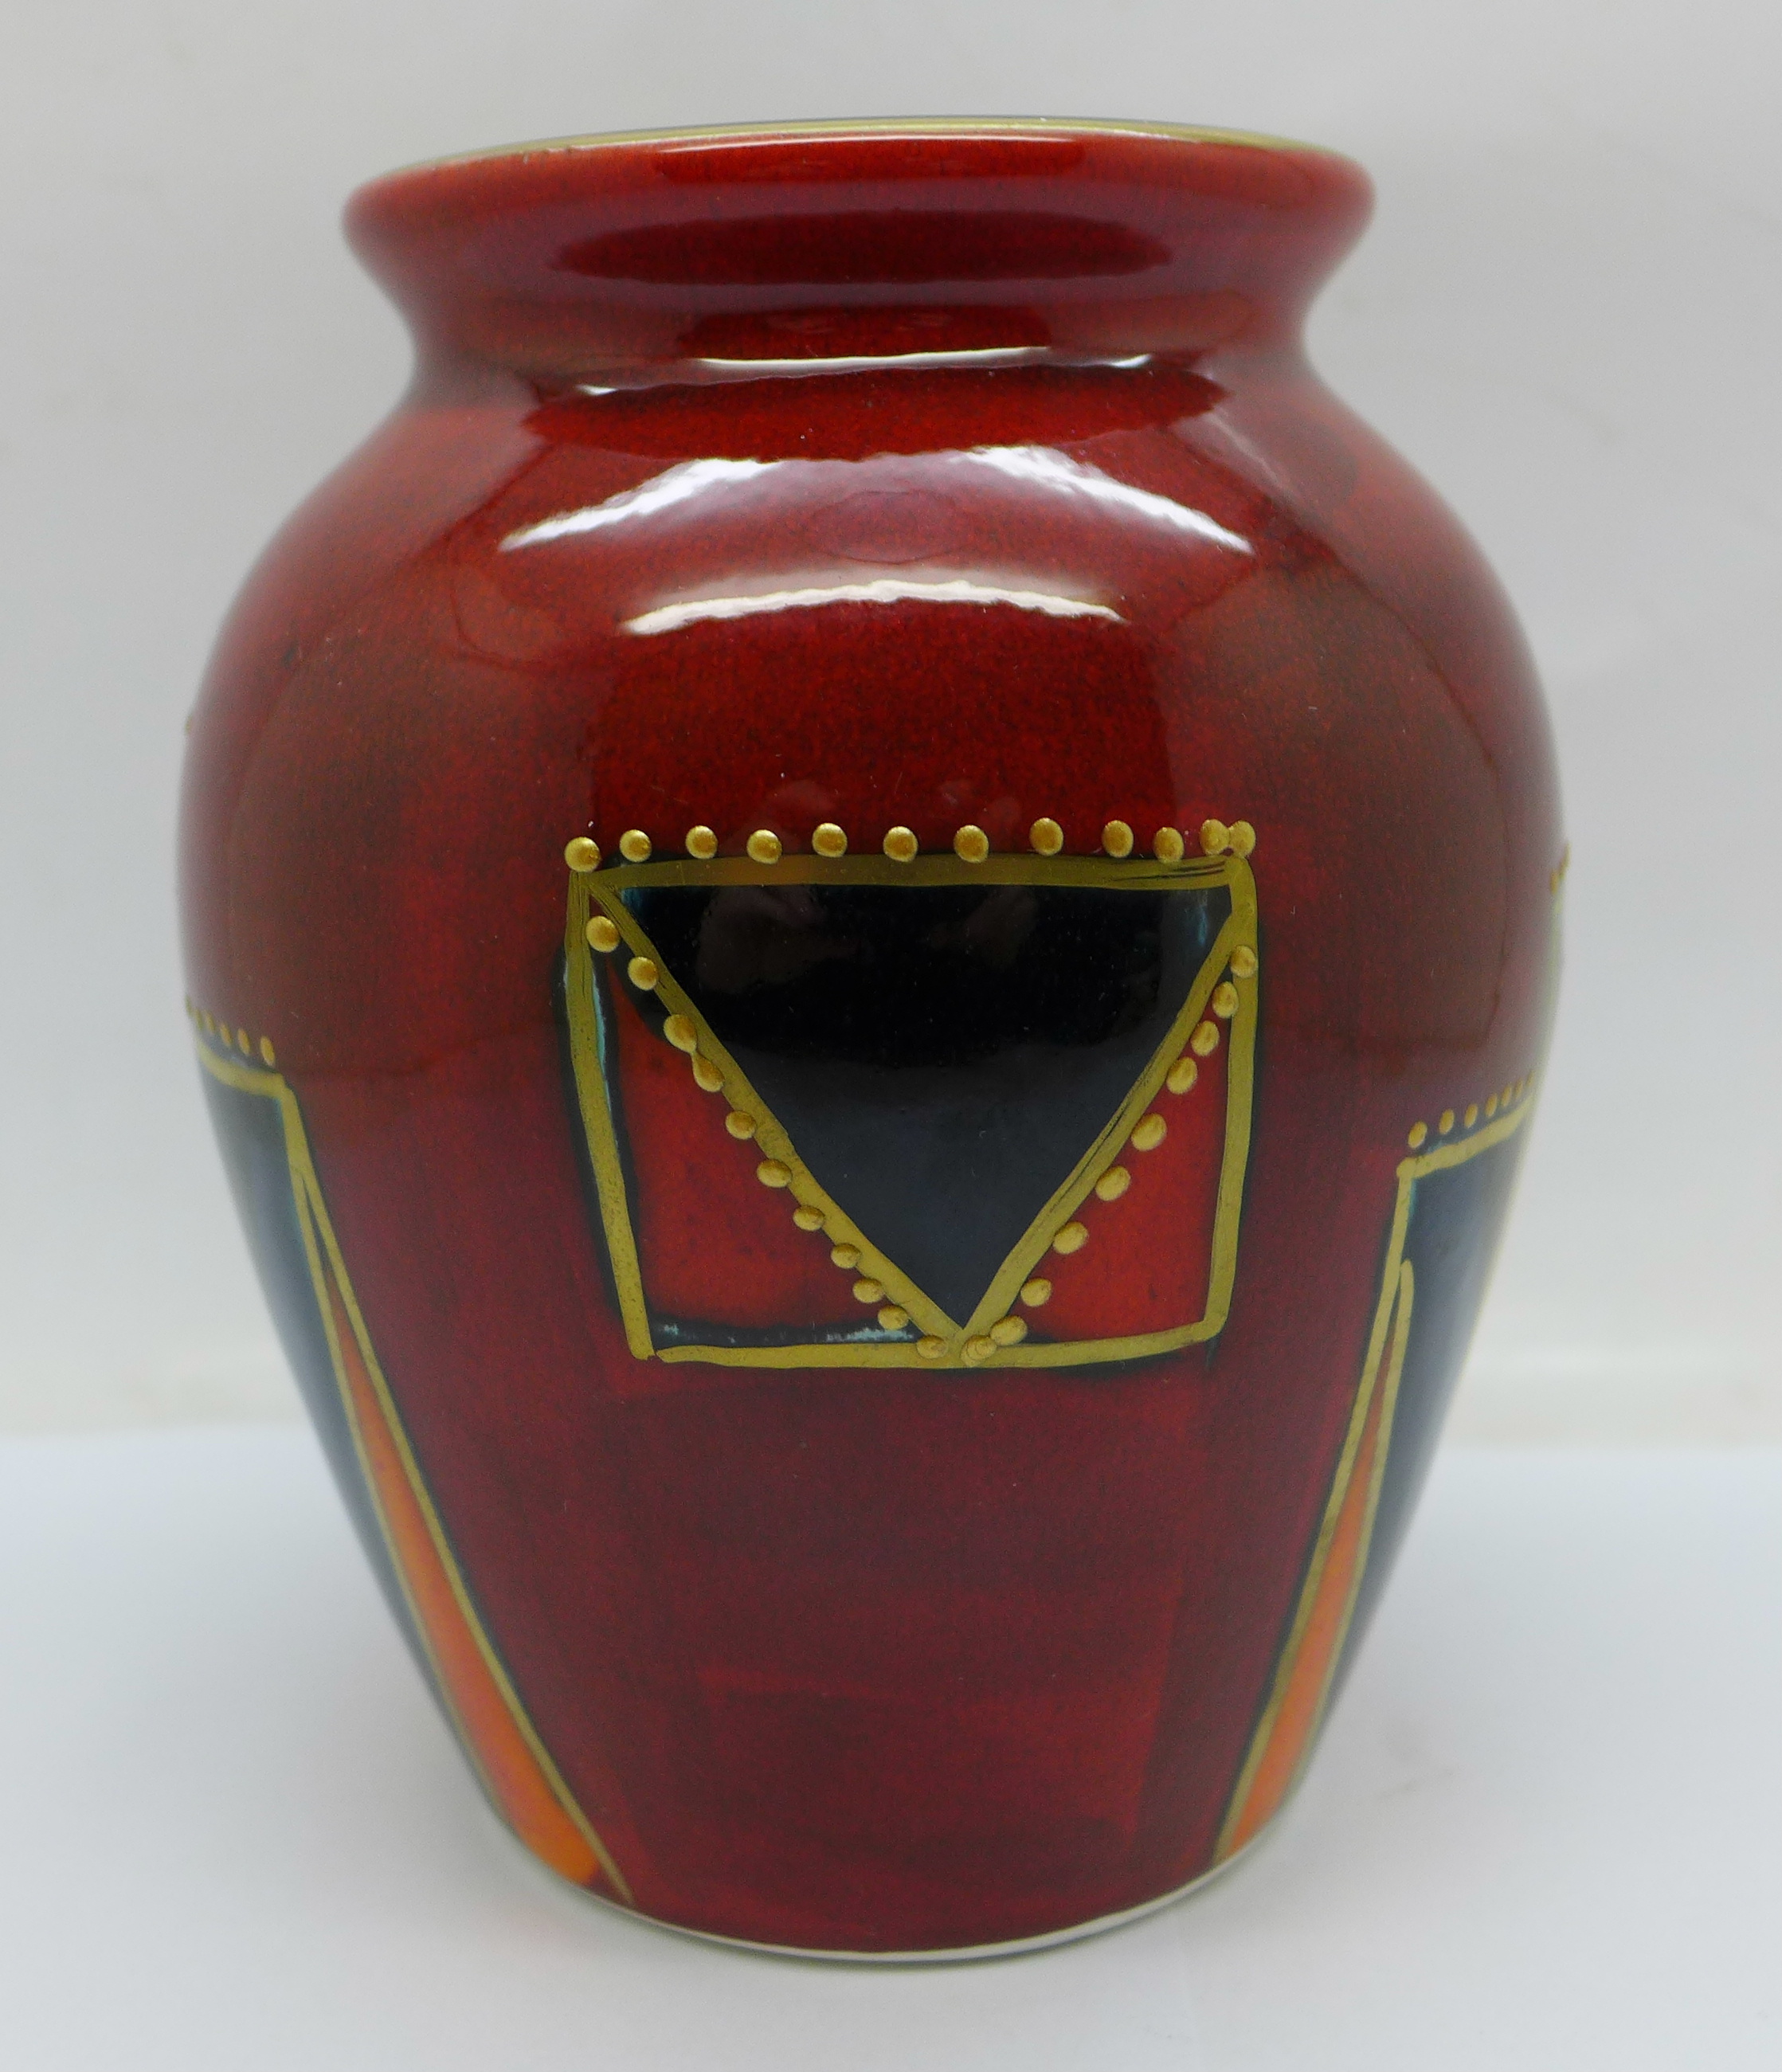 An Anita Harris art pottery vase, hand painted Ali Baba shape in the Deco design, signed by Anita - Image 3 of 8